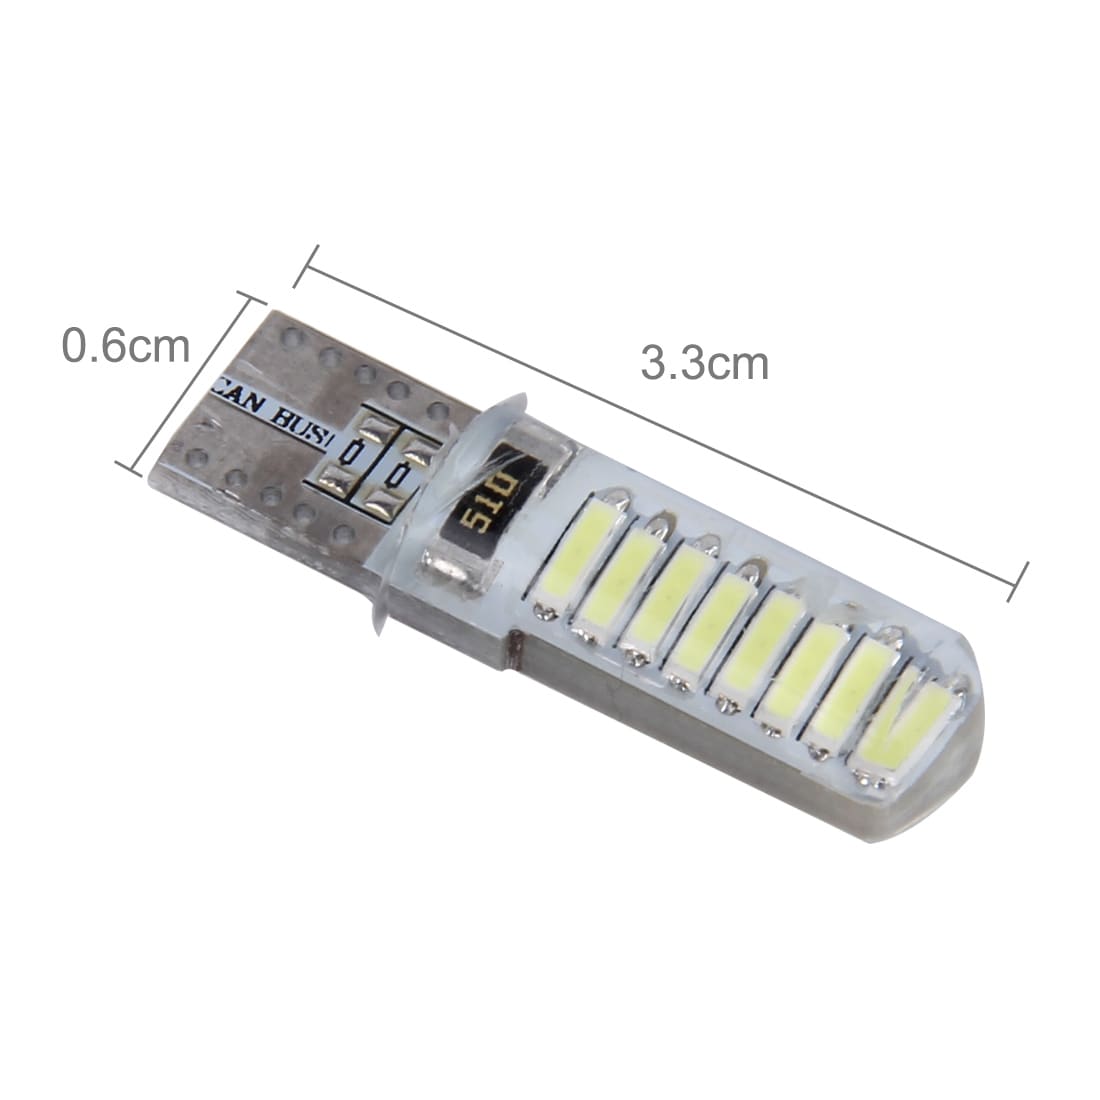 LED Diodlampa 3W 150LM 5500K 16 SMD-4014 Canbus - 2Pack